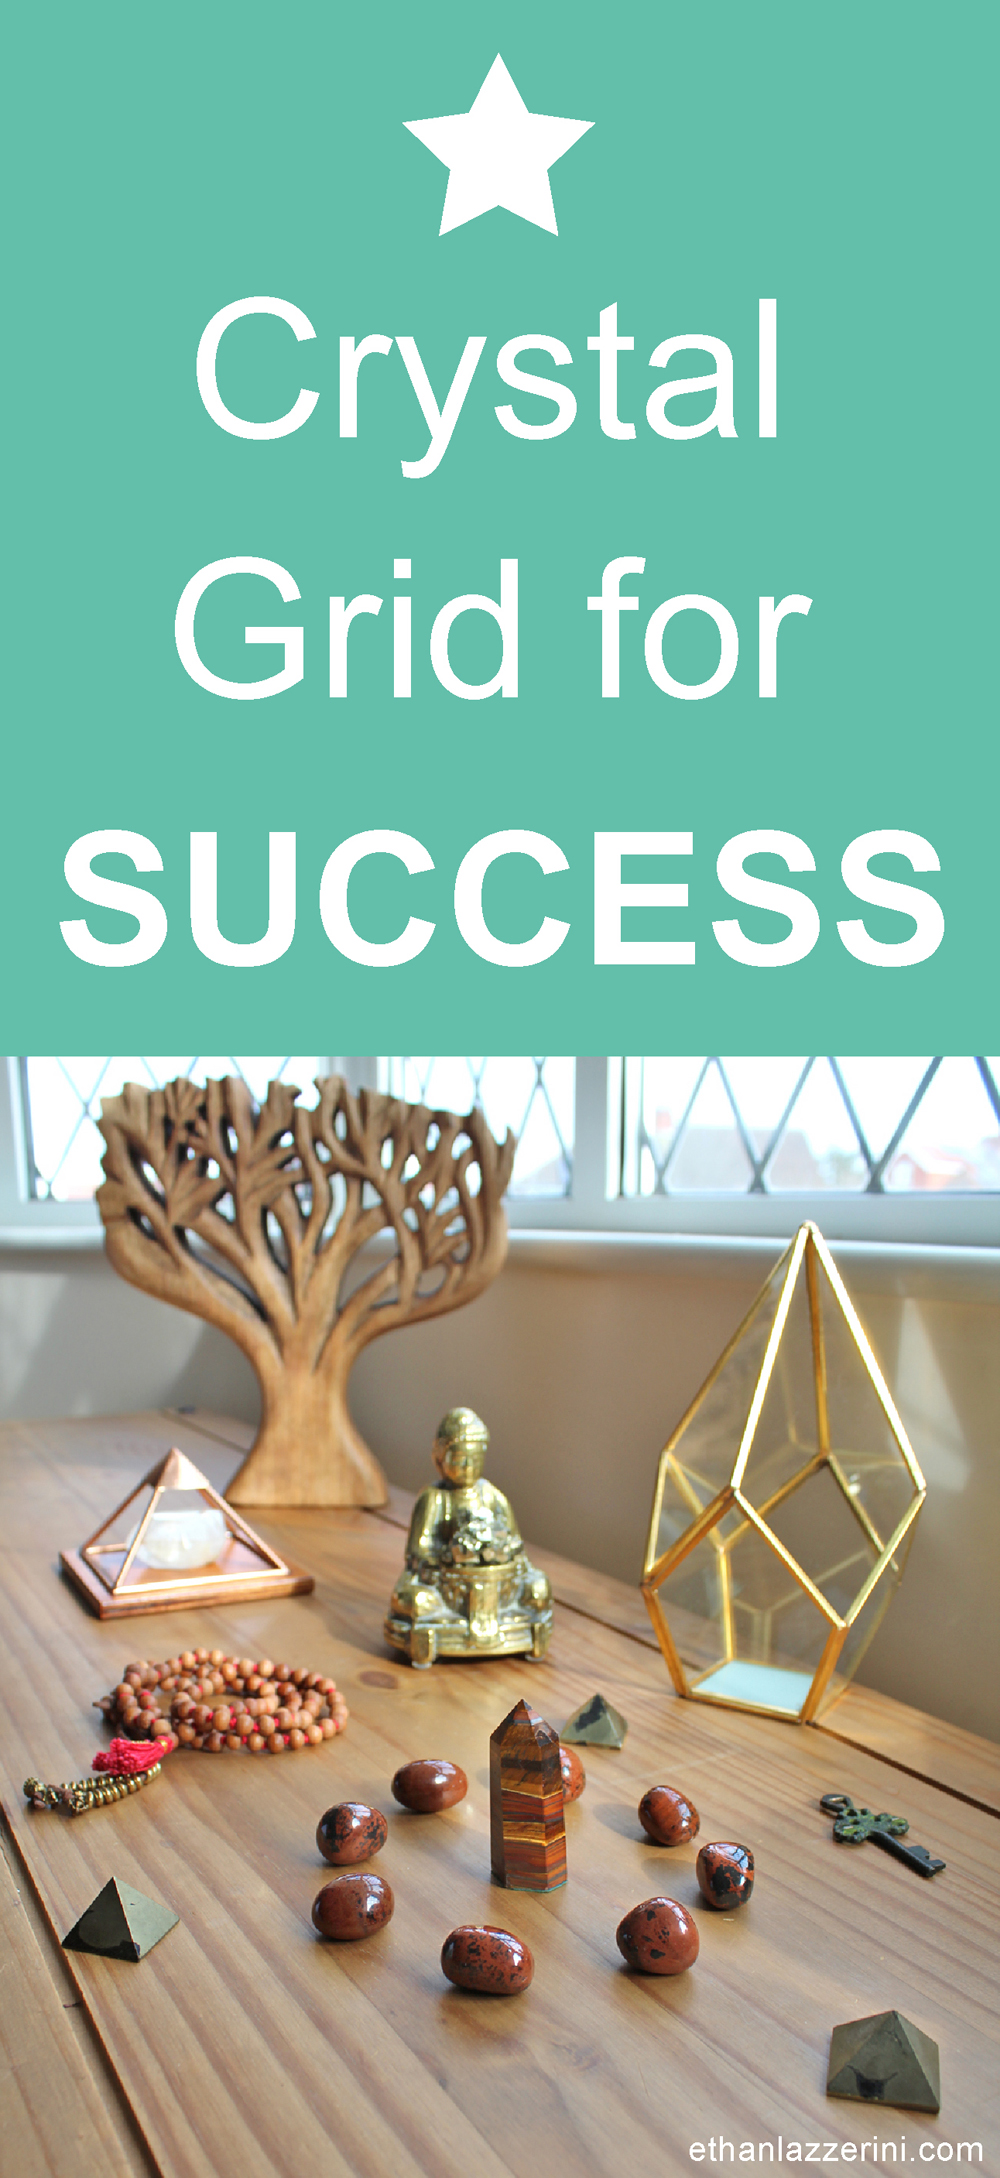 Crystal grid for success